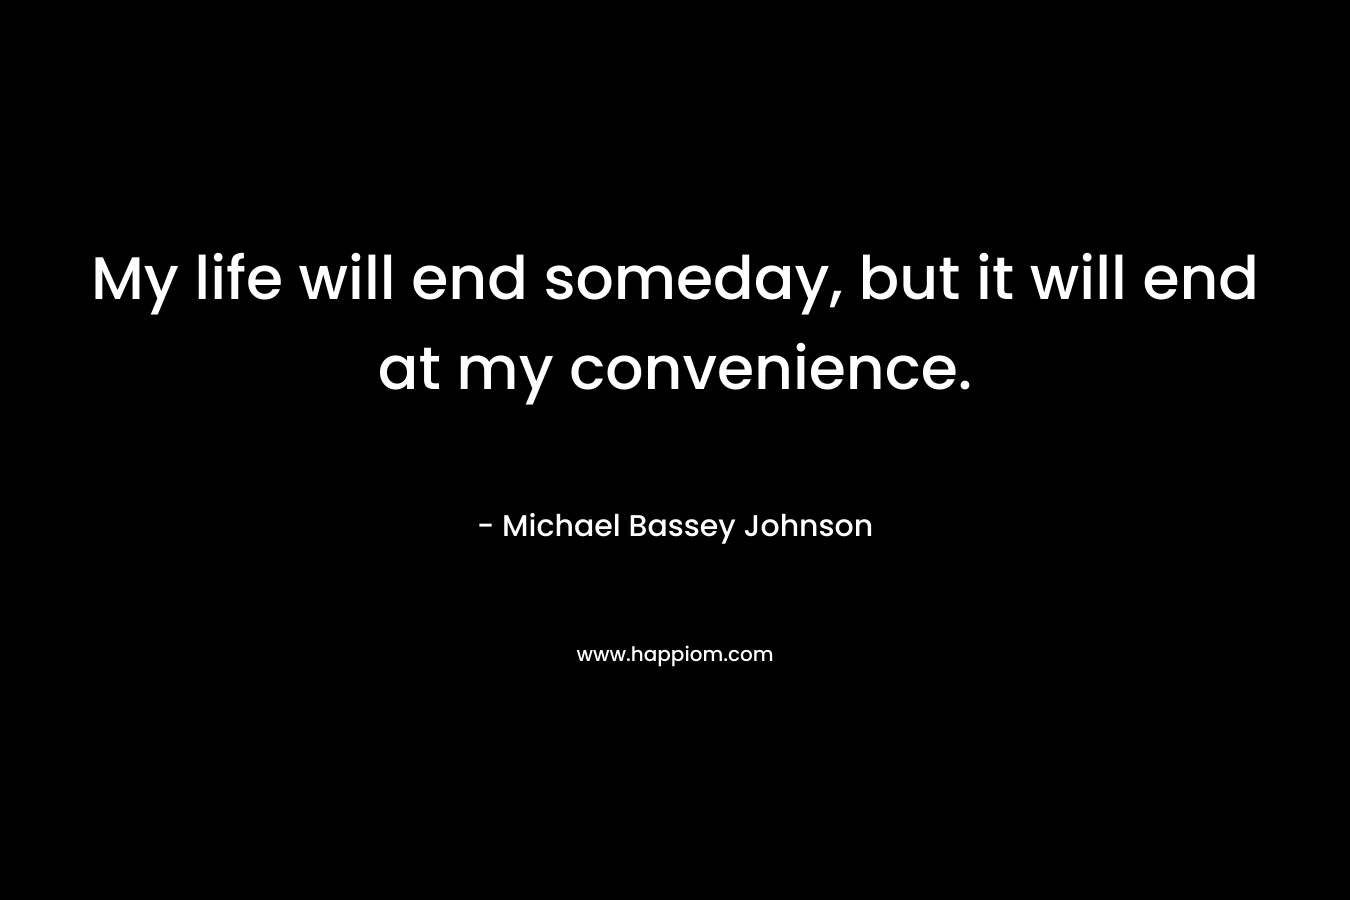 My life will end someday, but it will end at my convenience.